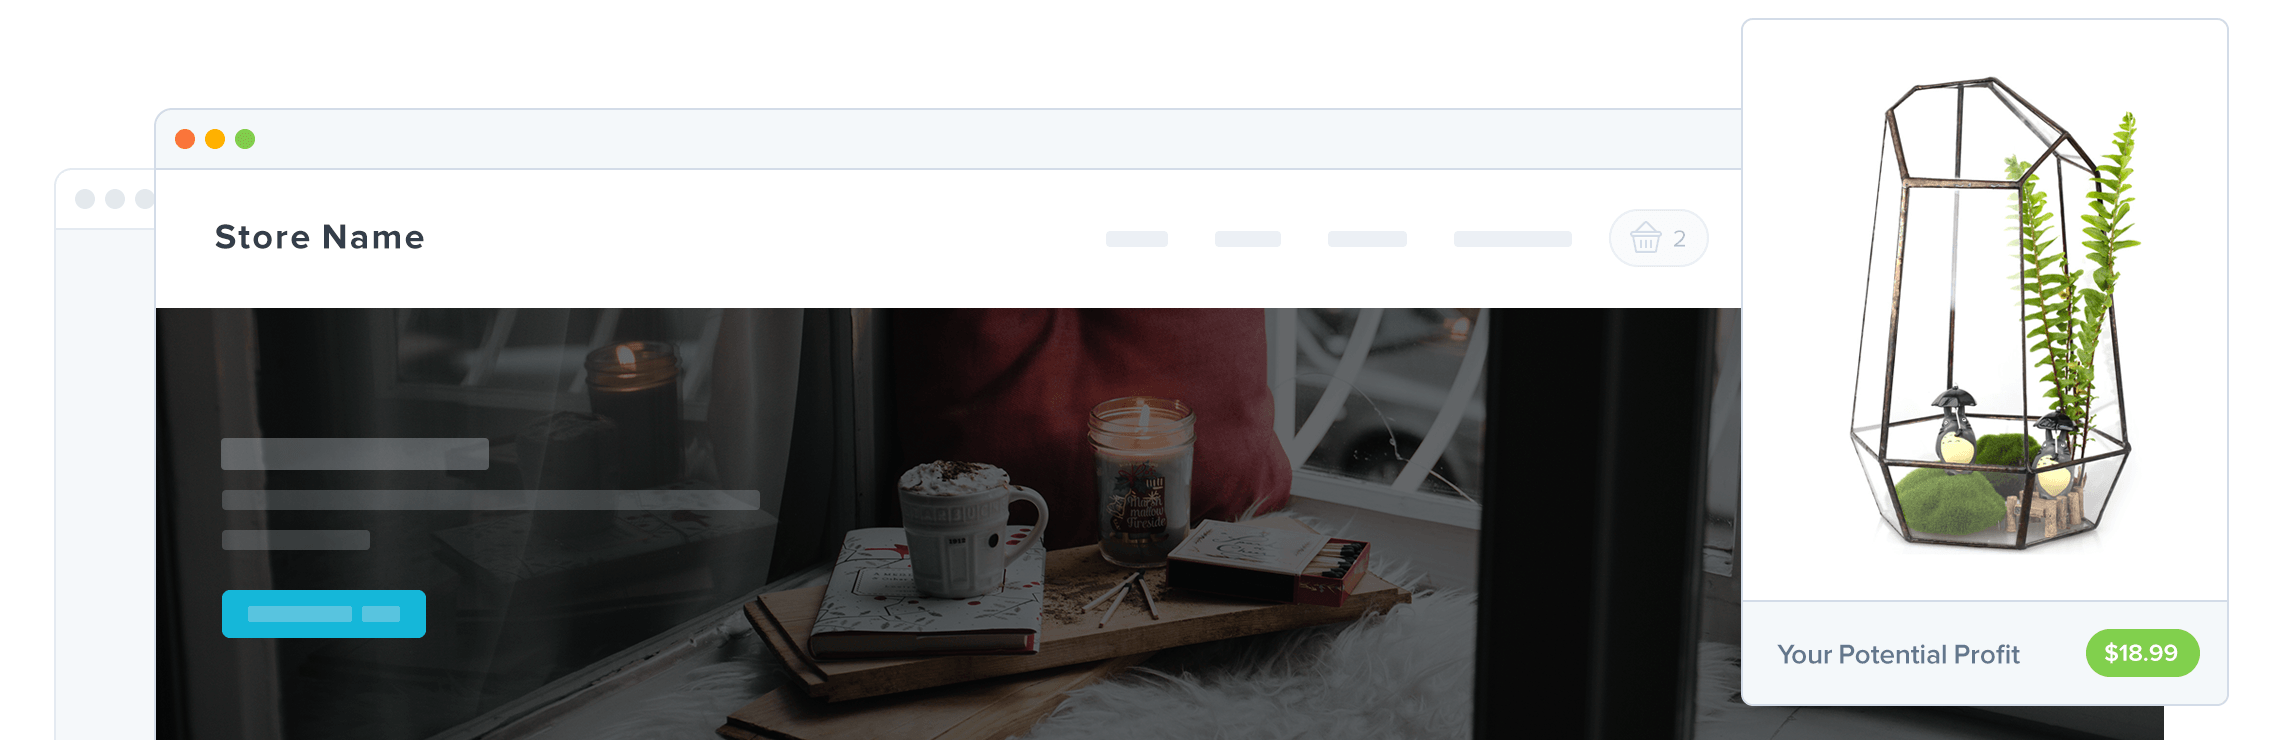 Dropshipping home decor with Oberlo